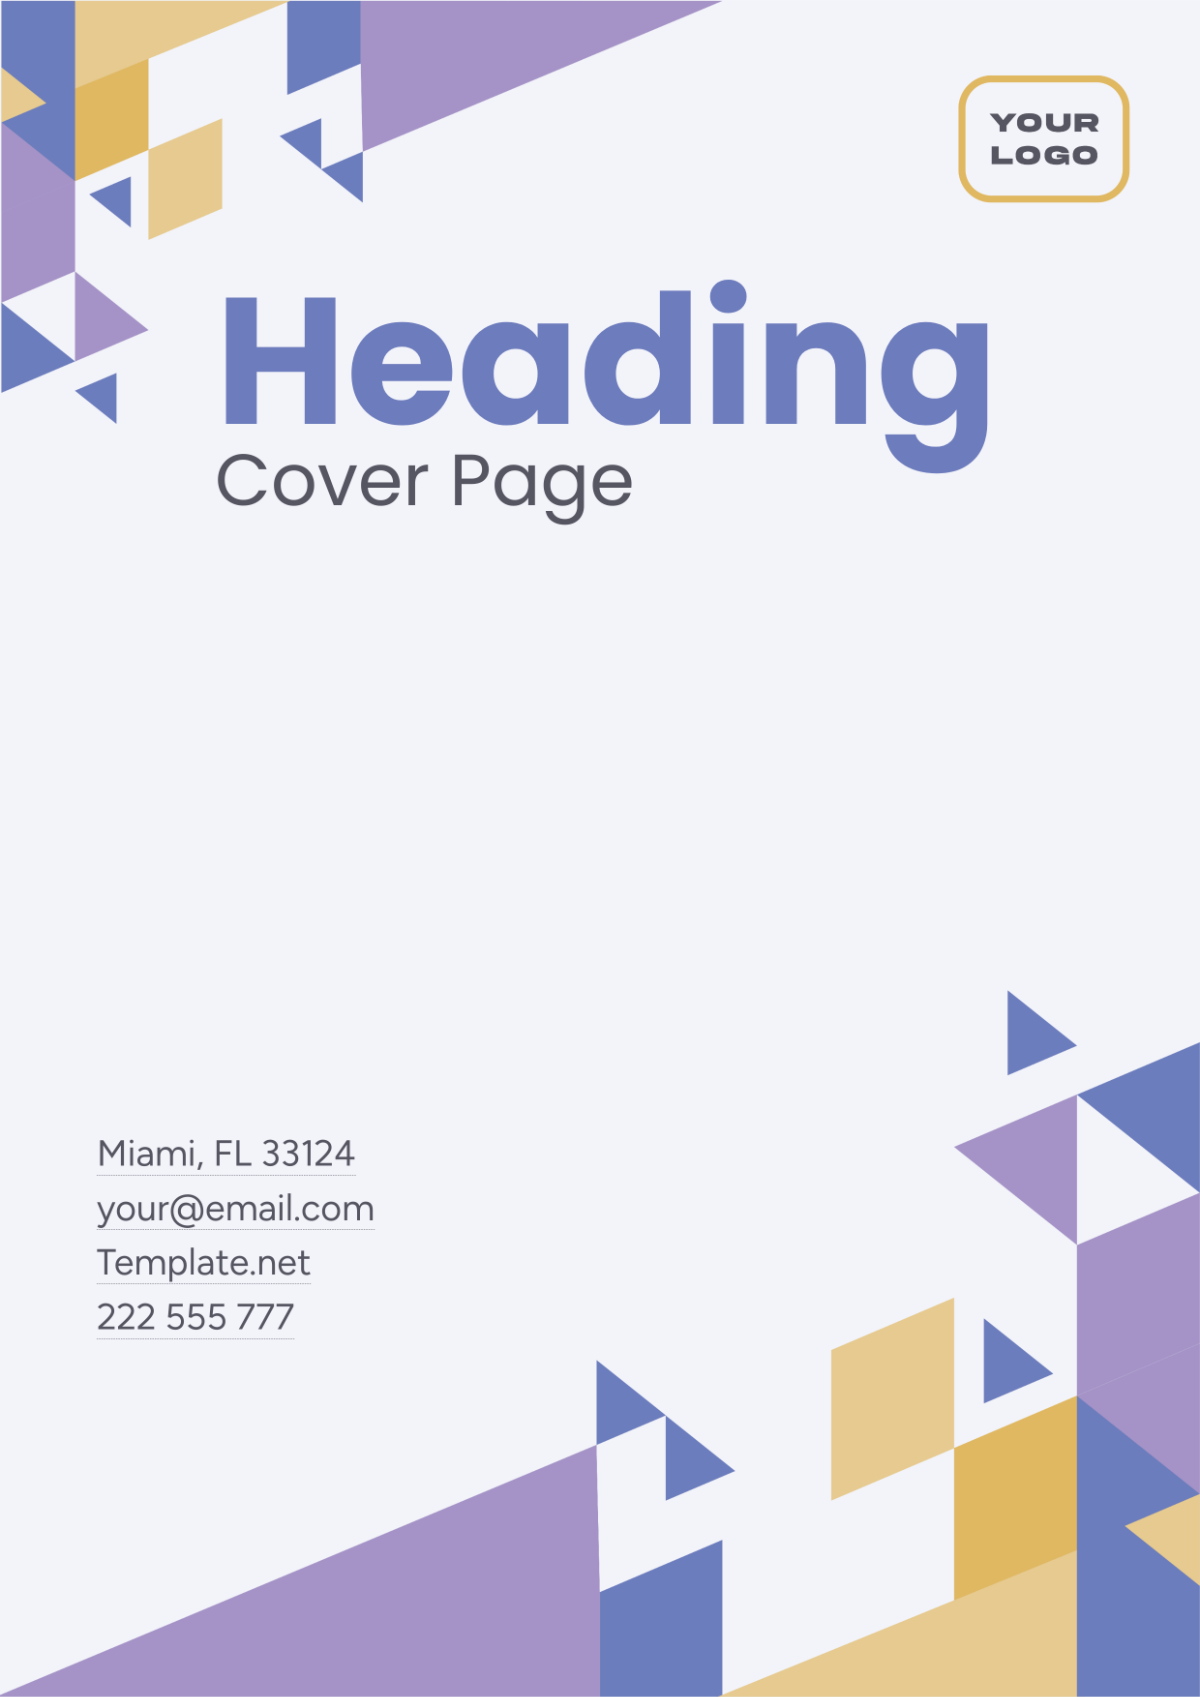 Heading Cover Page Template